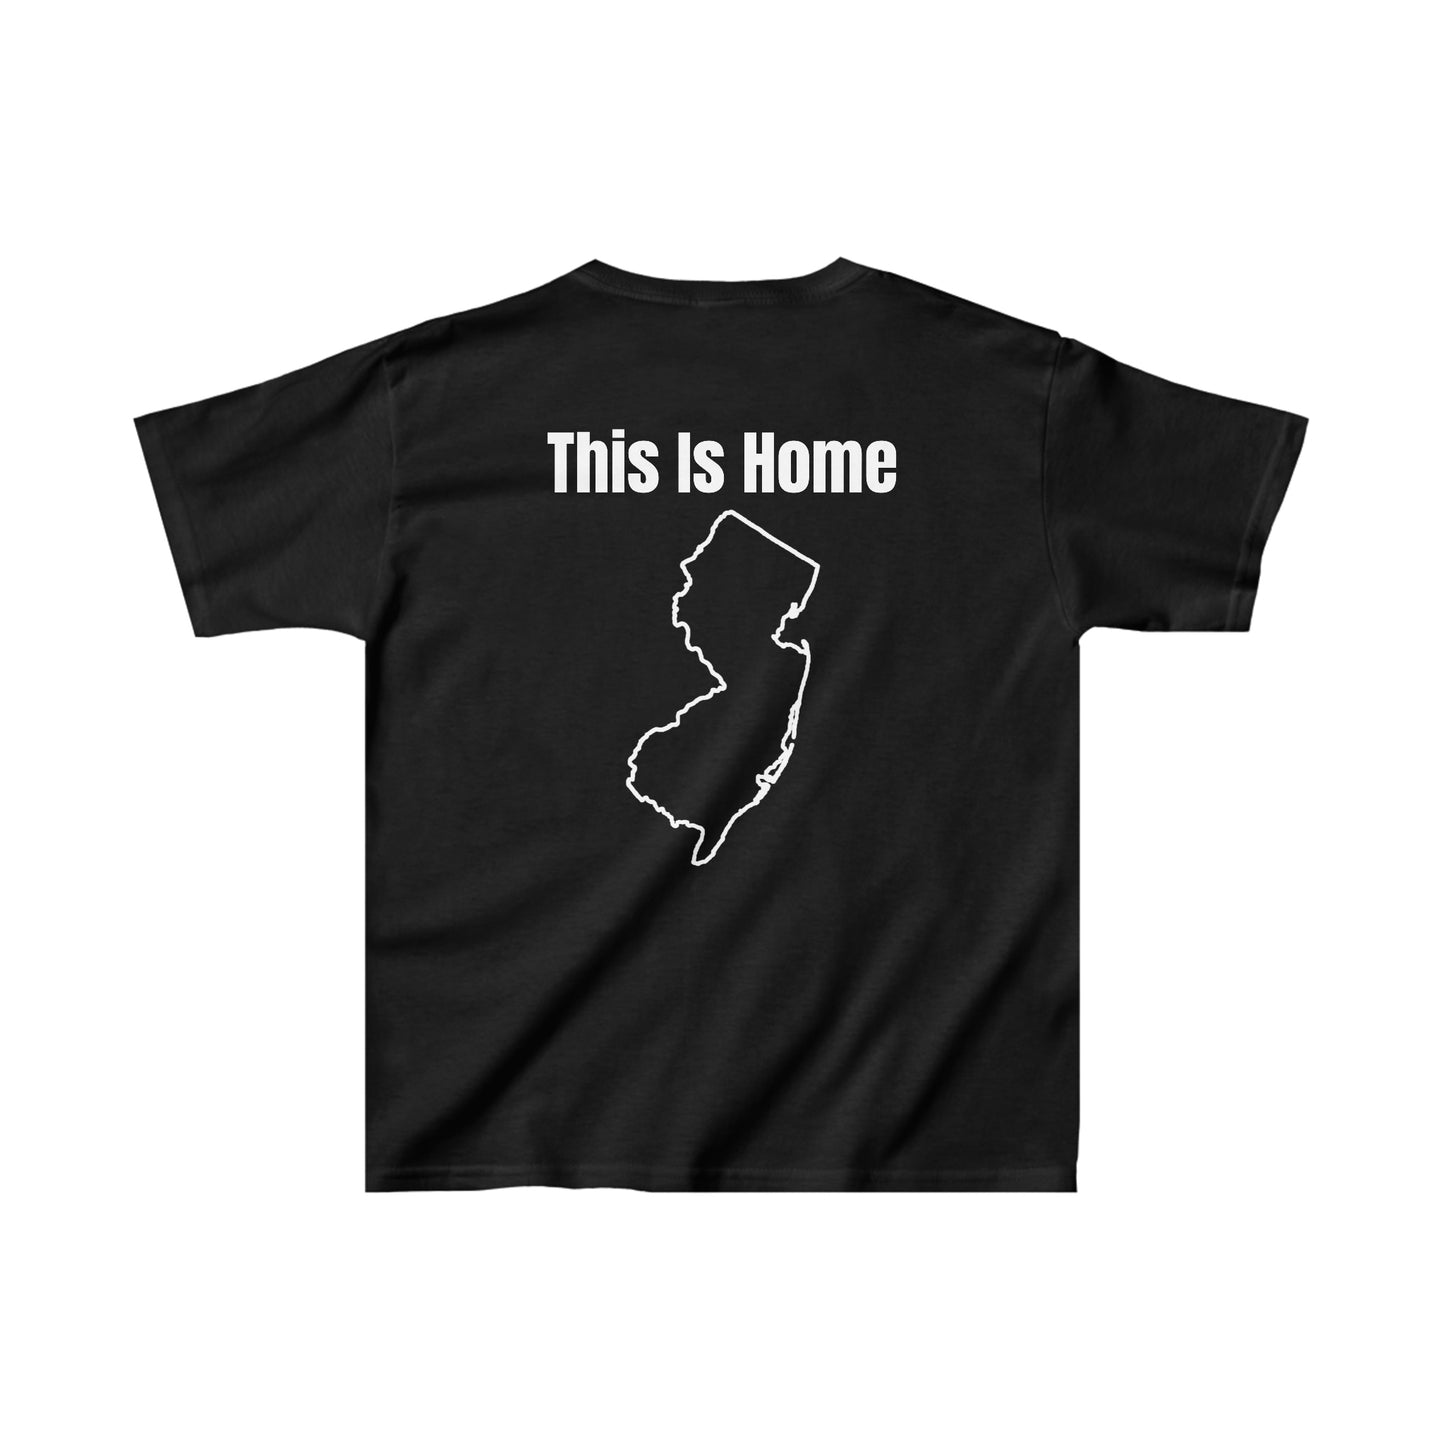 Brian Soldano - This Is Home - Kids Tee